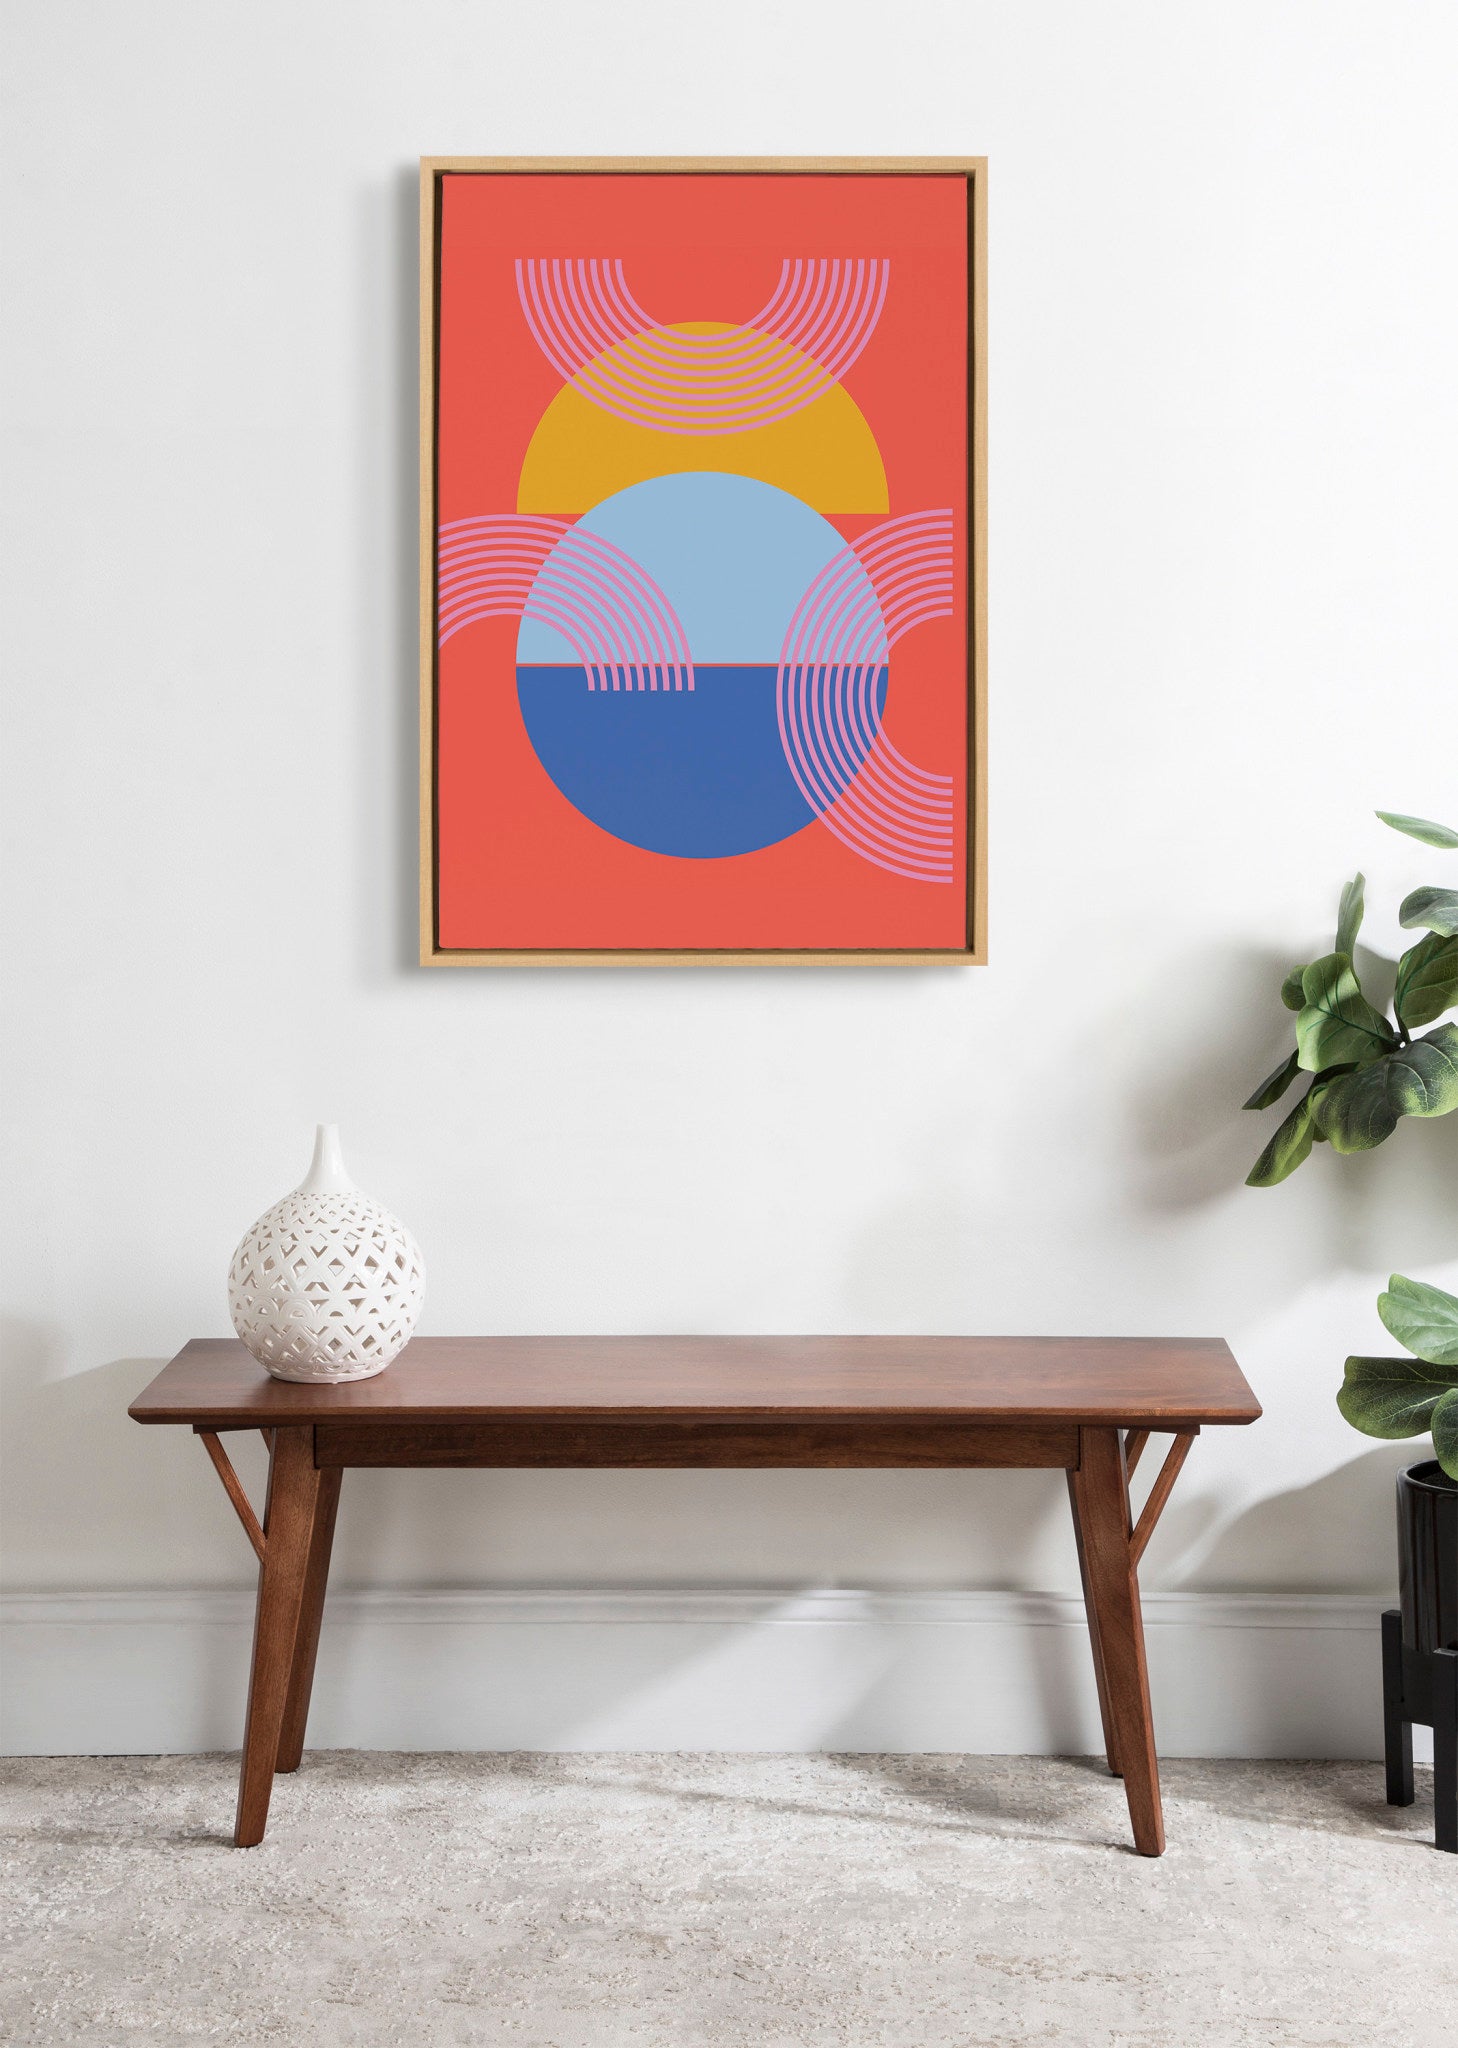 Geometric Color Block Poster by apricot+birch